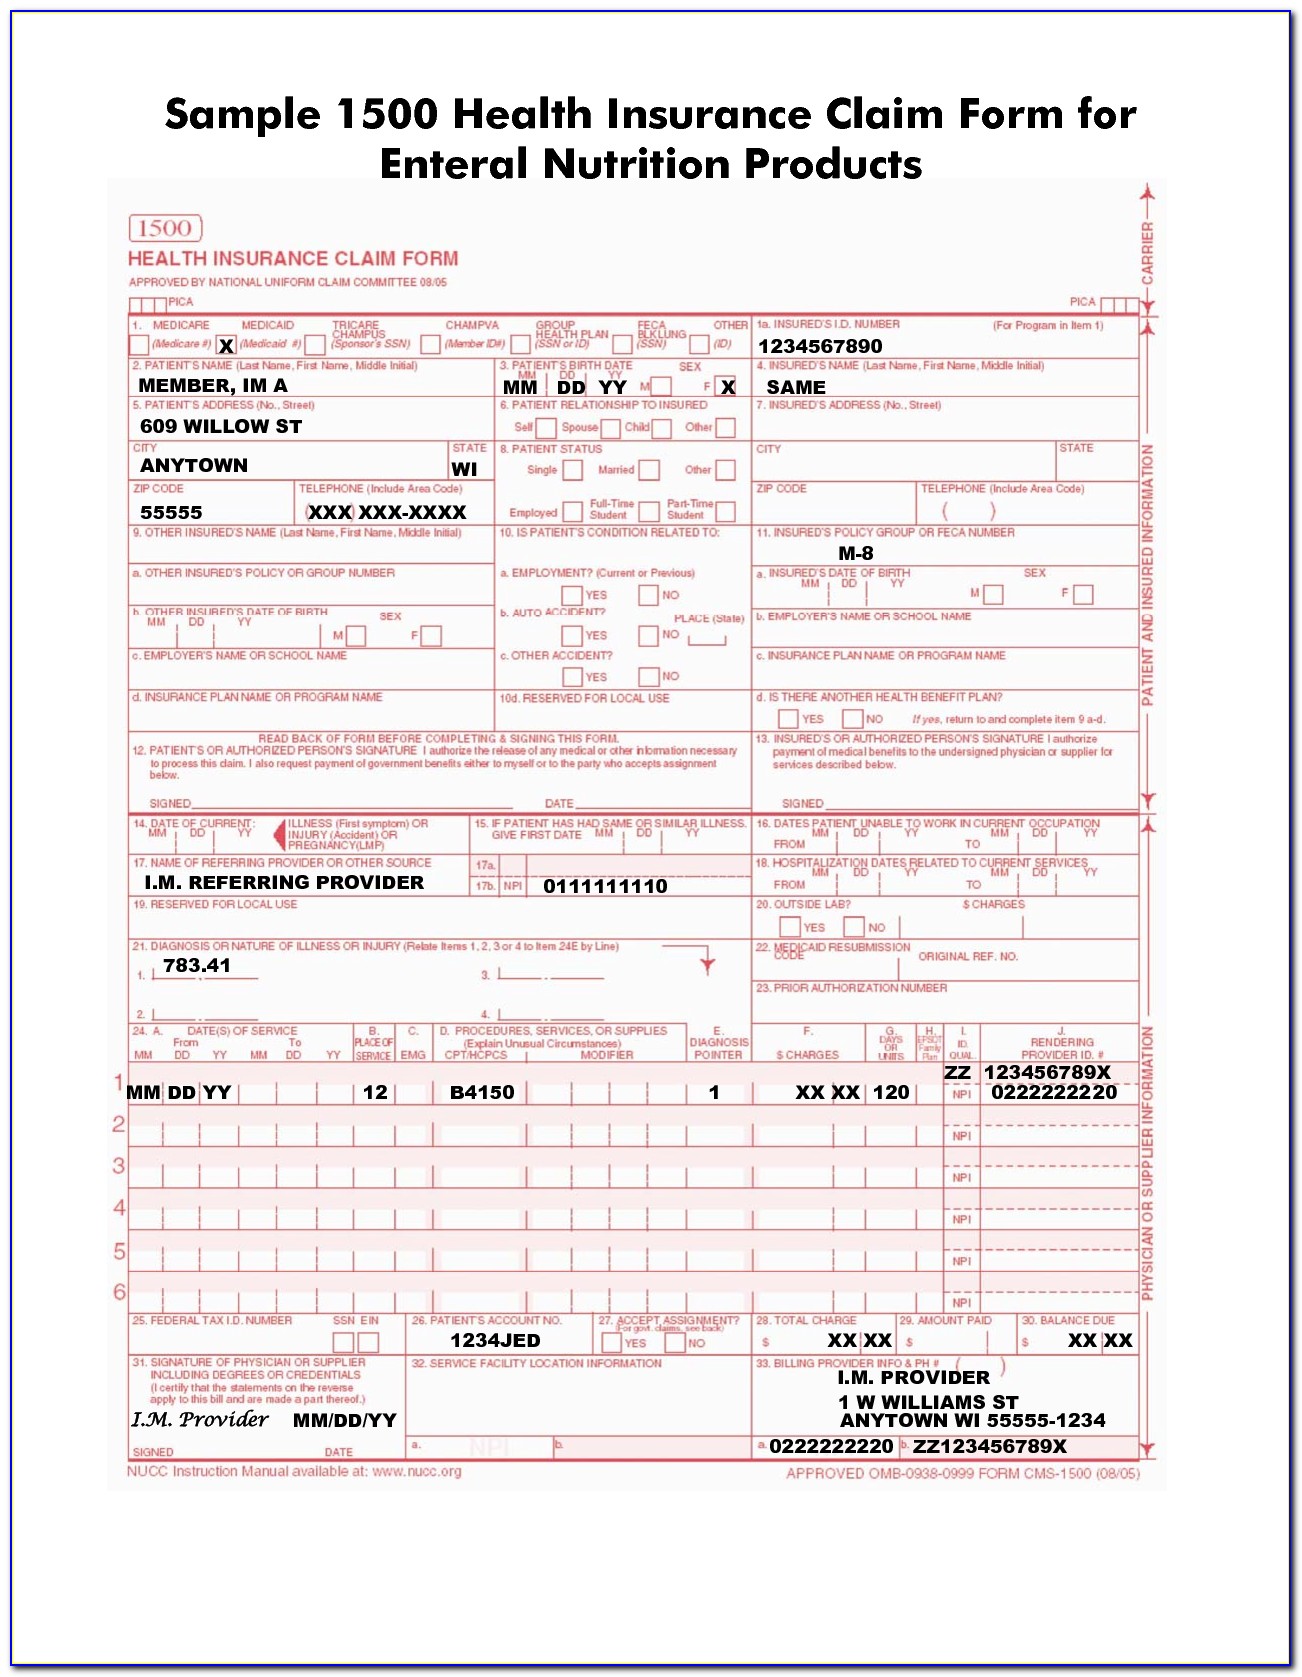 Sample 1500 Claim Form Filled Out Form Resume Examples a15qXrADeQ